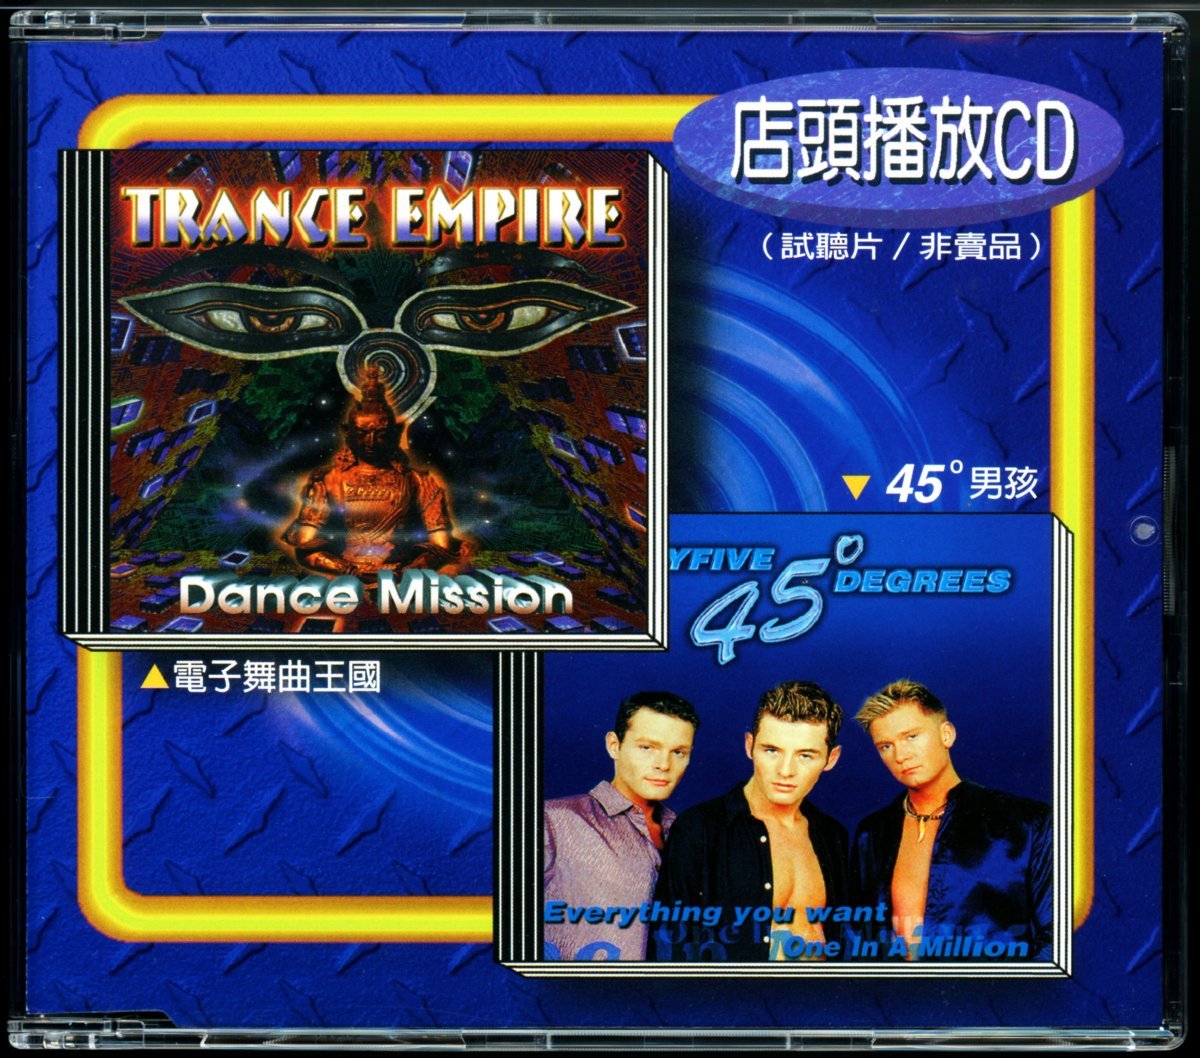 【CDコンピ/Trance/Euro House/R&B】「Trance Empire - Dance Mission」 & 「Fortyfive Degrees - Everything U Want / One In A Million」_画像1